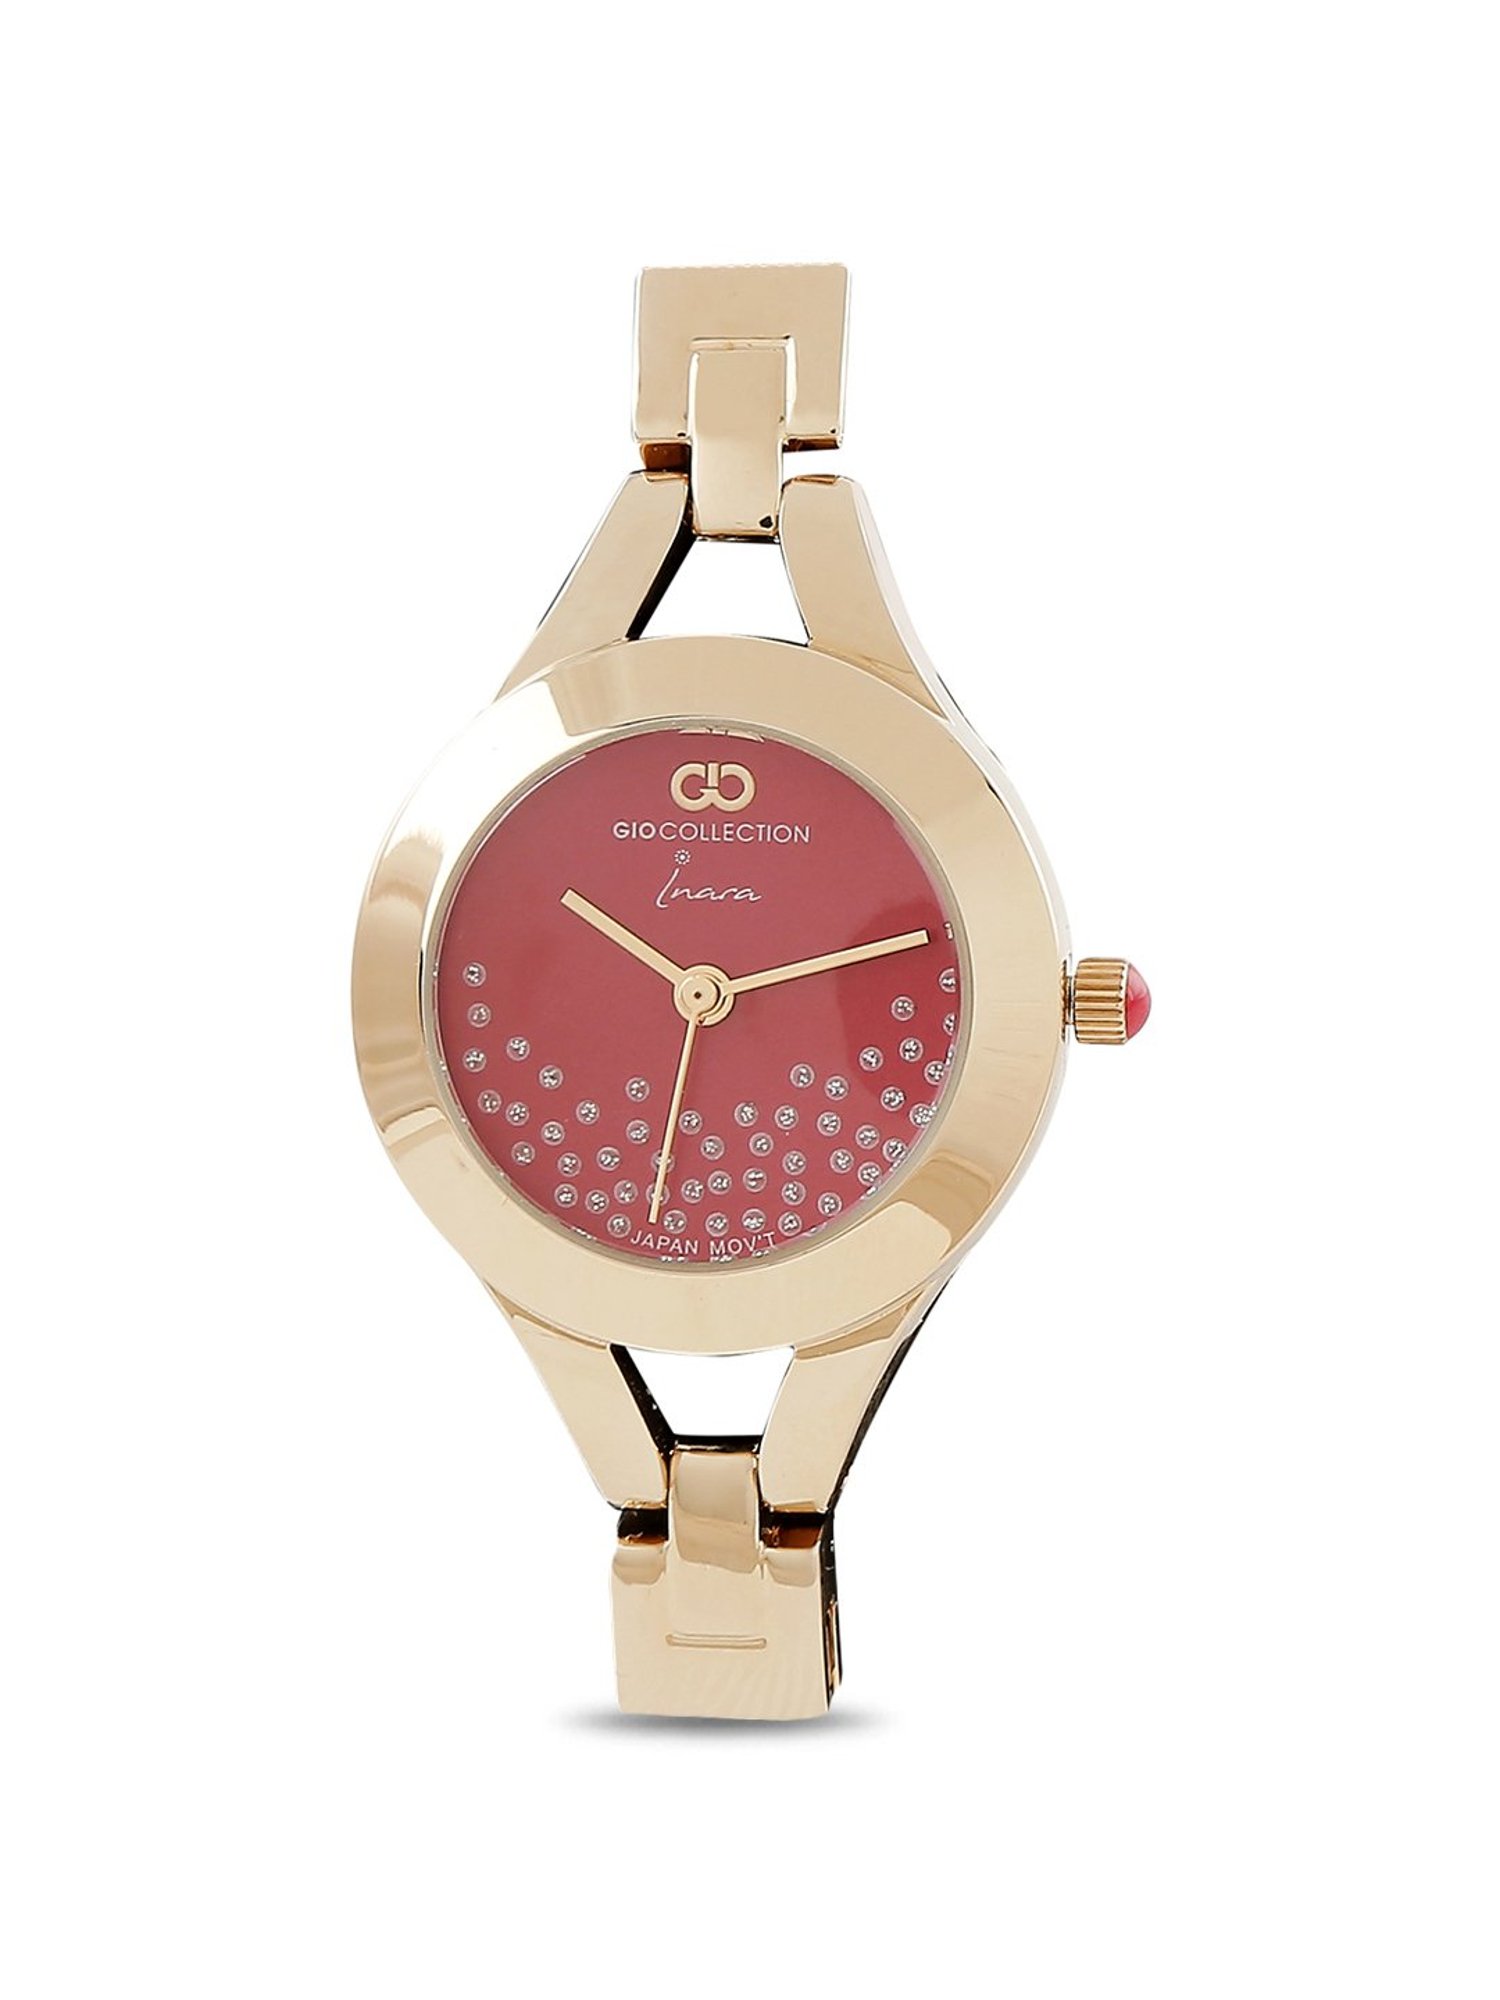 Buy Gio Collection G2135-44 Inara Analog Watch for Women at Best Price @  Tata CLiQ